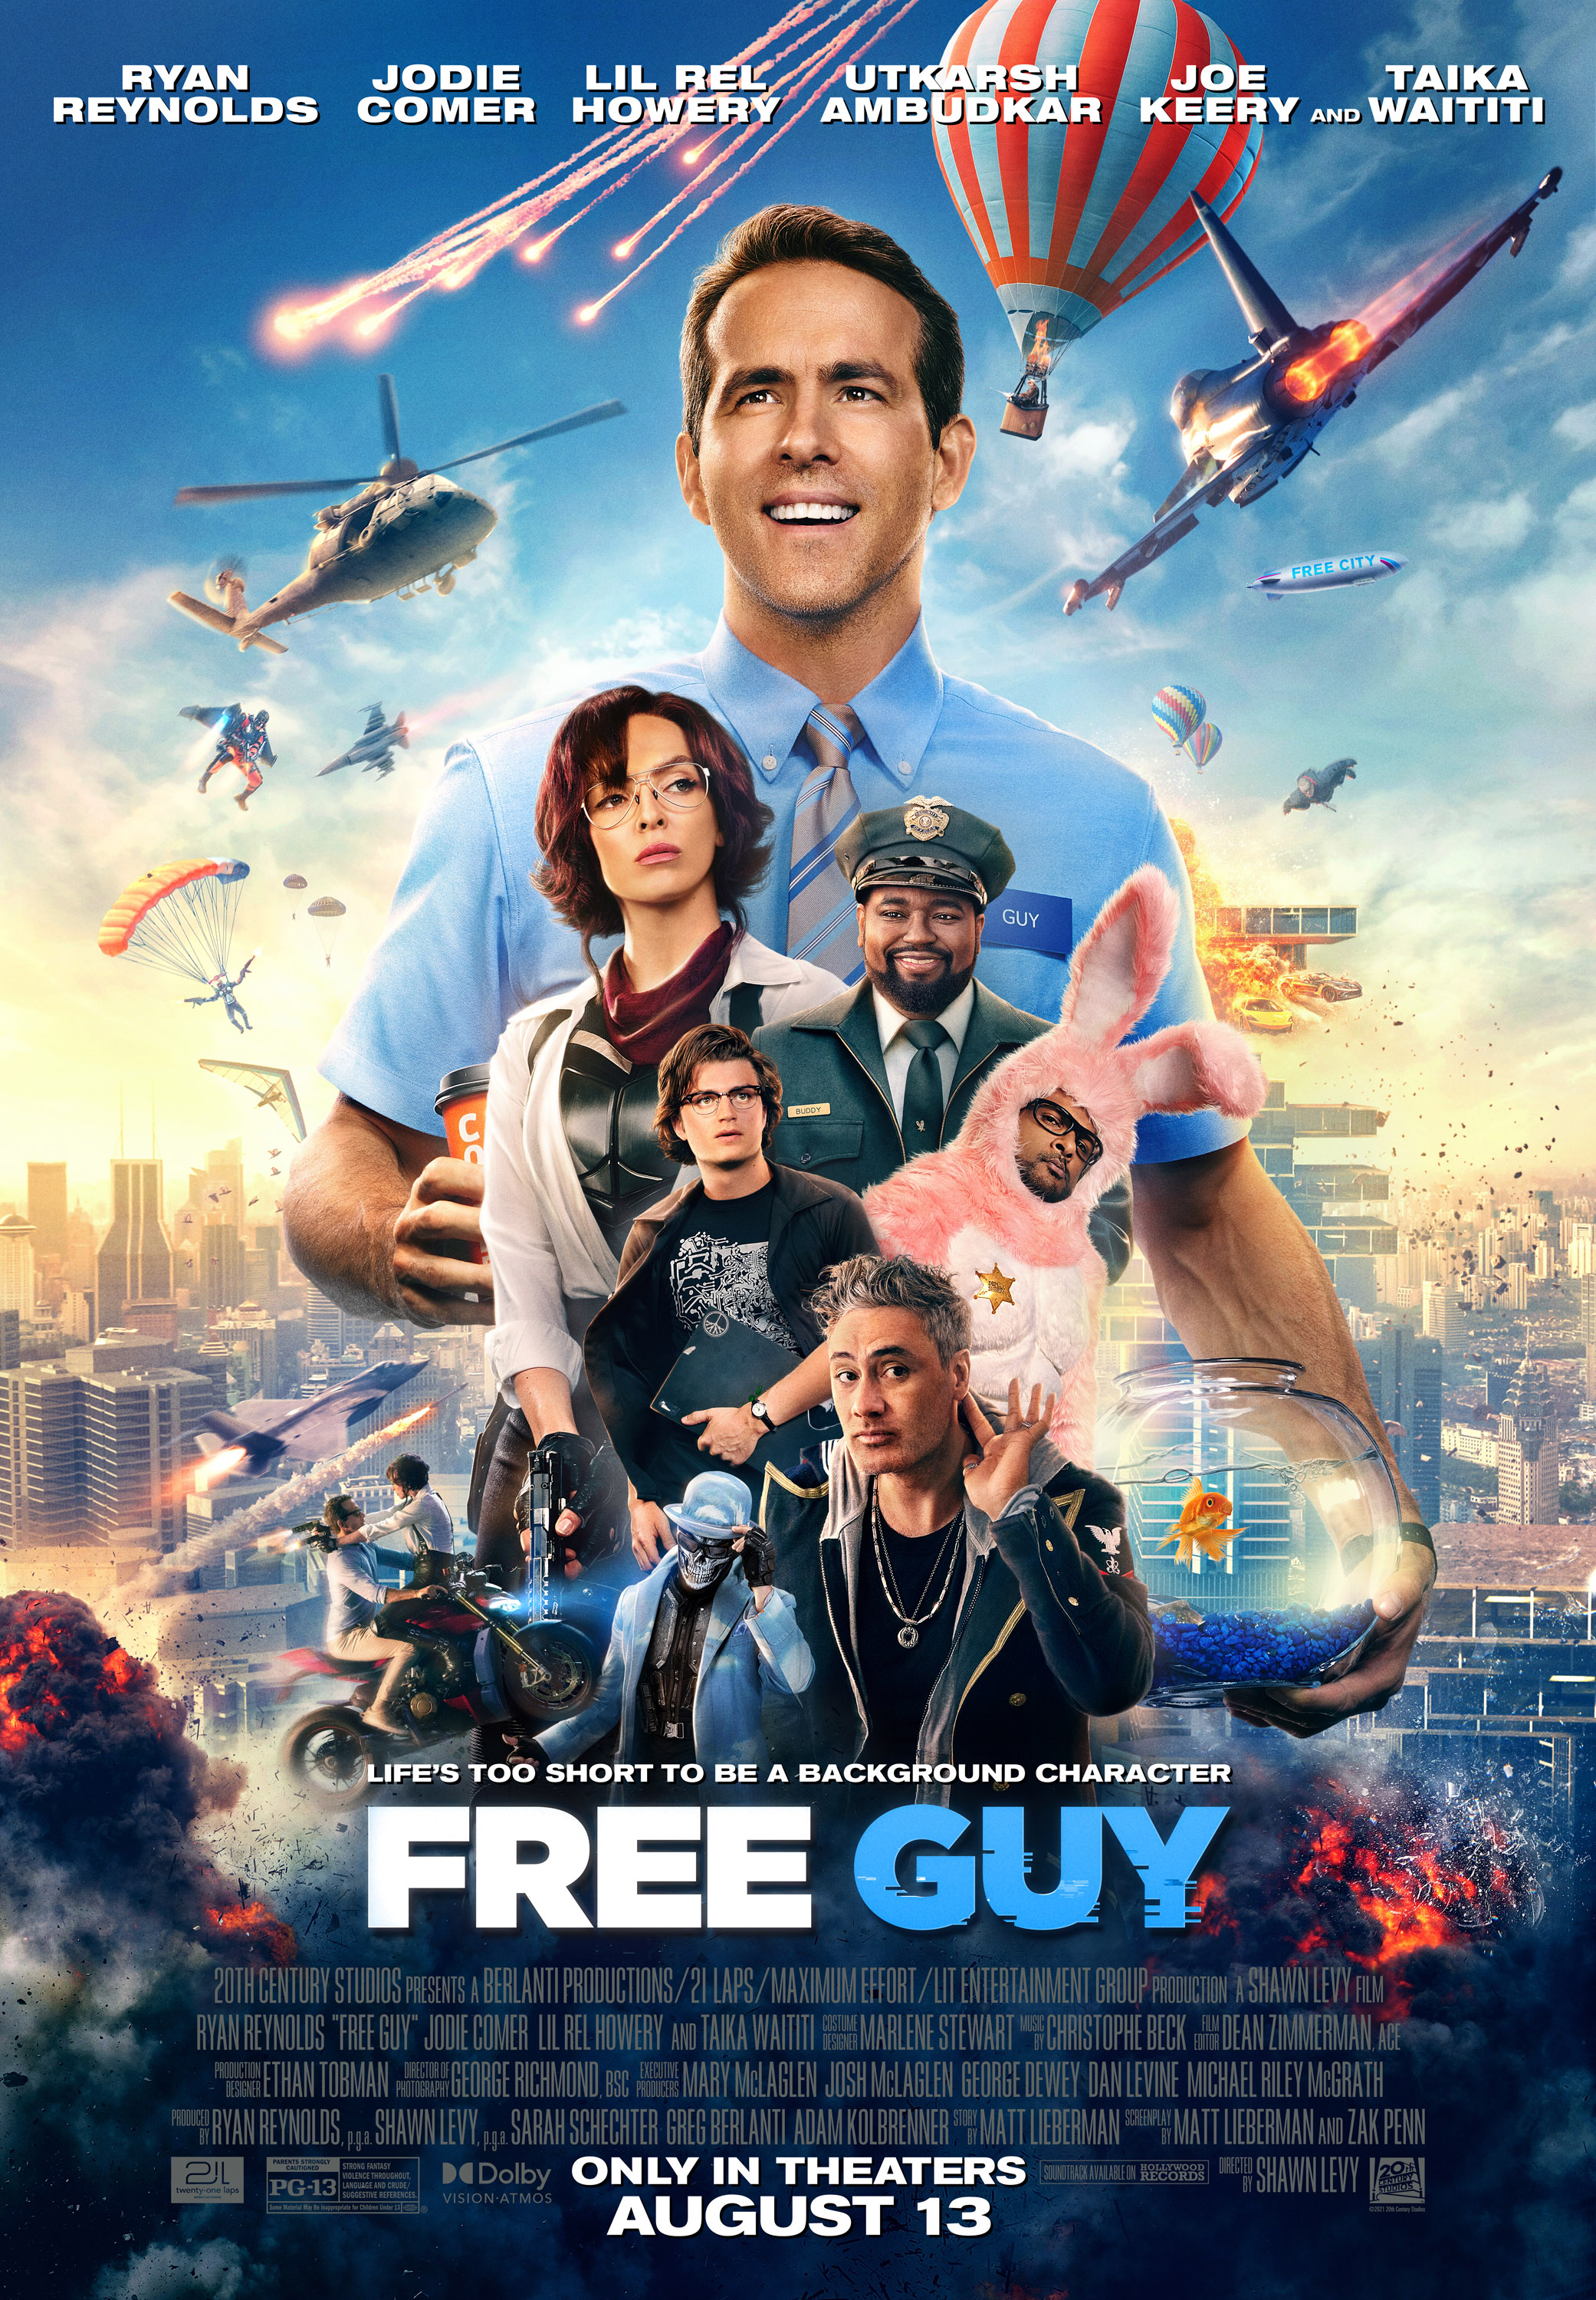 FoF to host the Grapevine, Houston and Austin Premiere of Free Guy